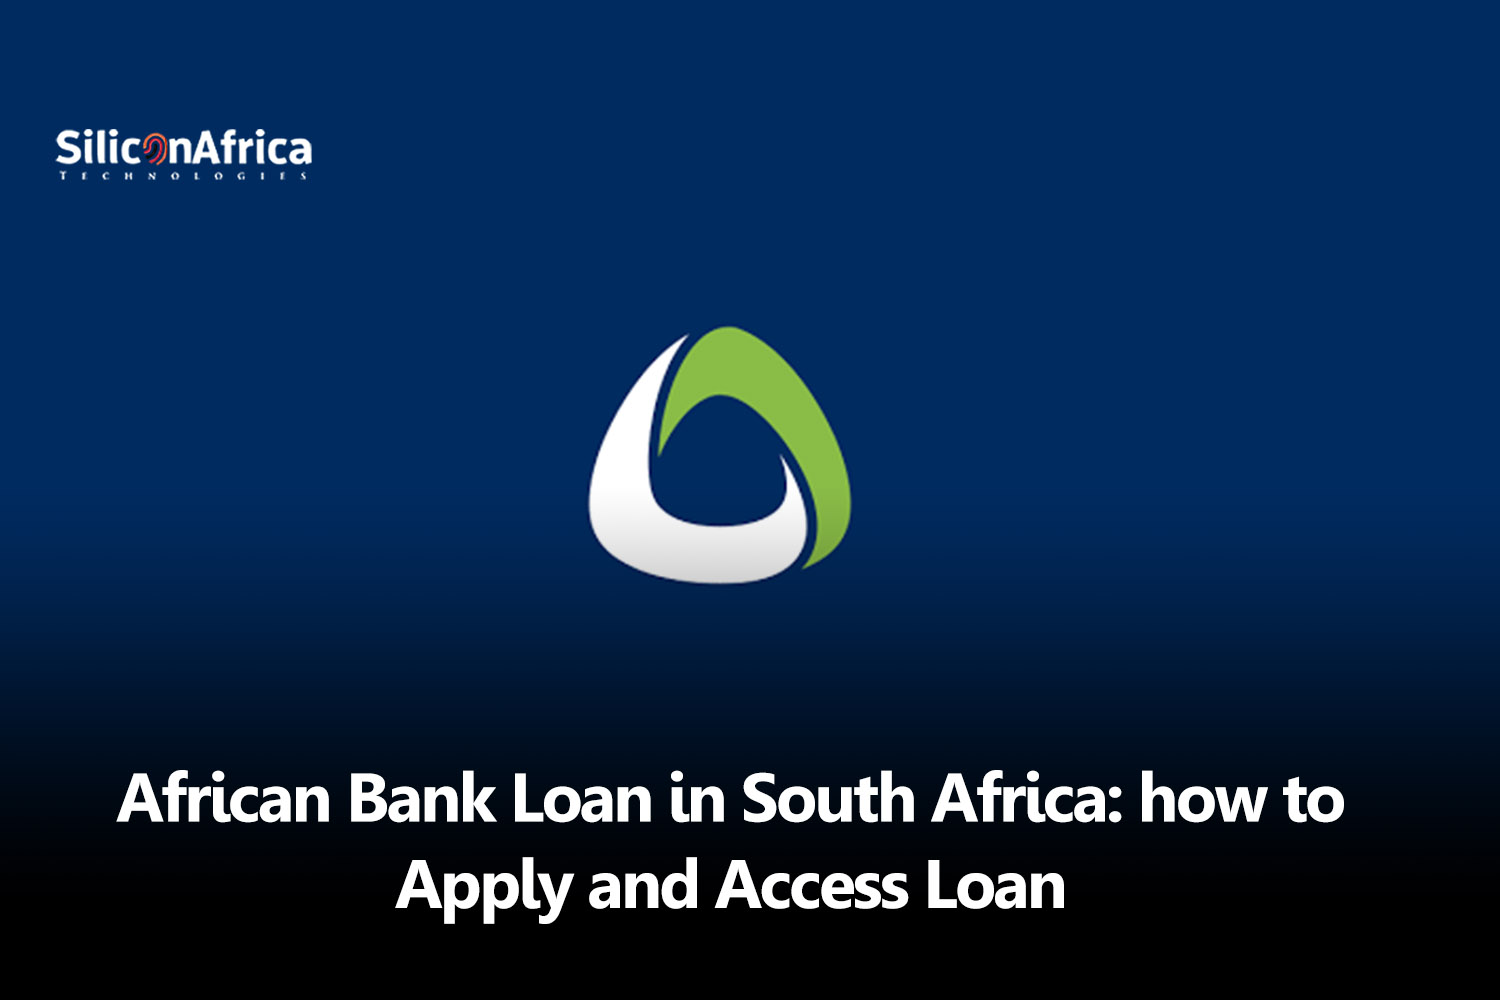 African Bank Loan in South Africa Requirements and Interest Rates